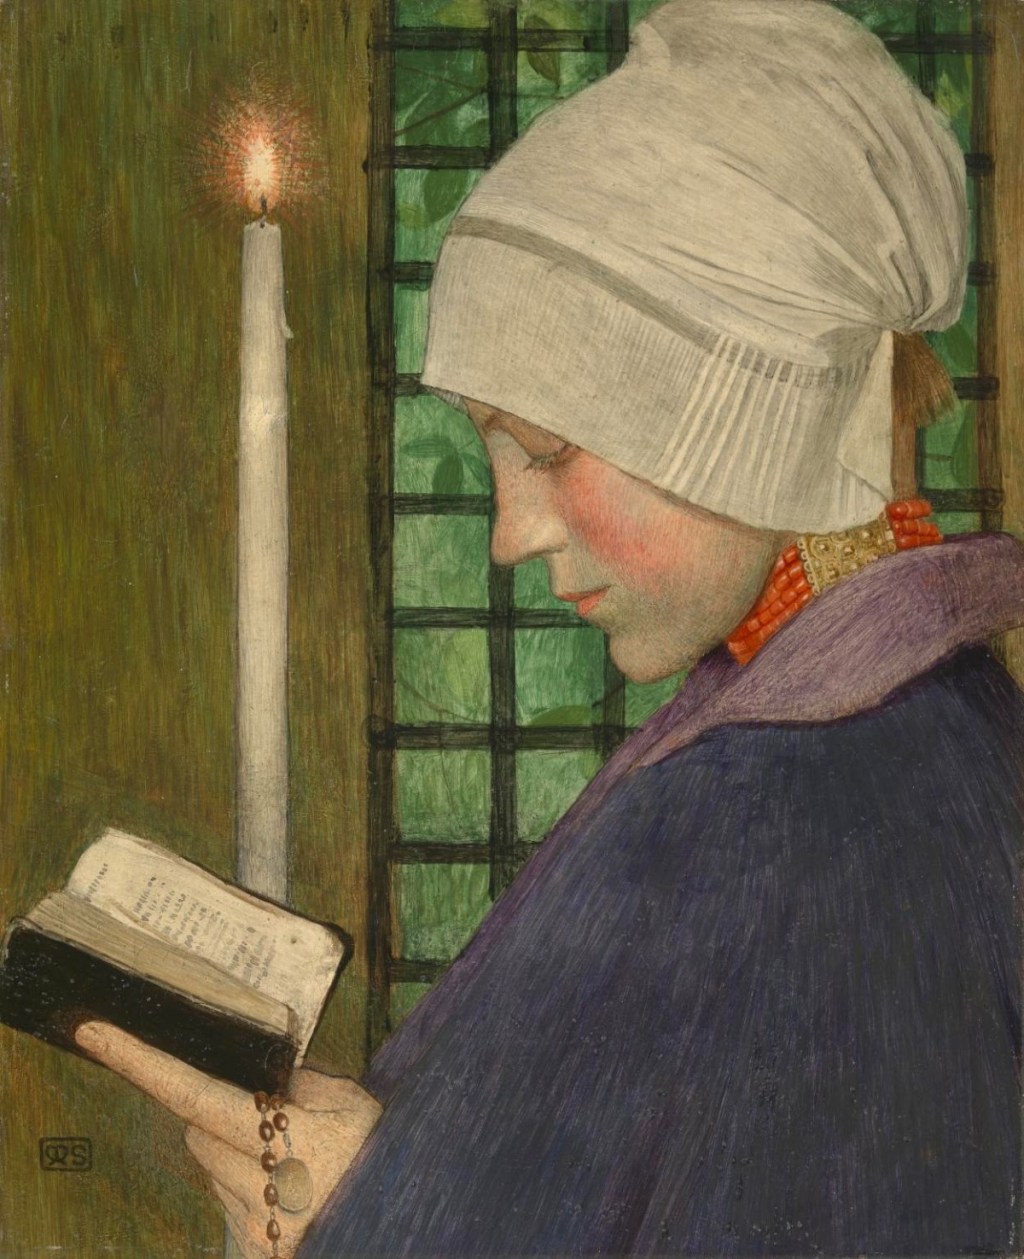 "Candlemas Day" by Marianne Stokes, Tate Gallery, London.